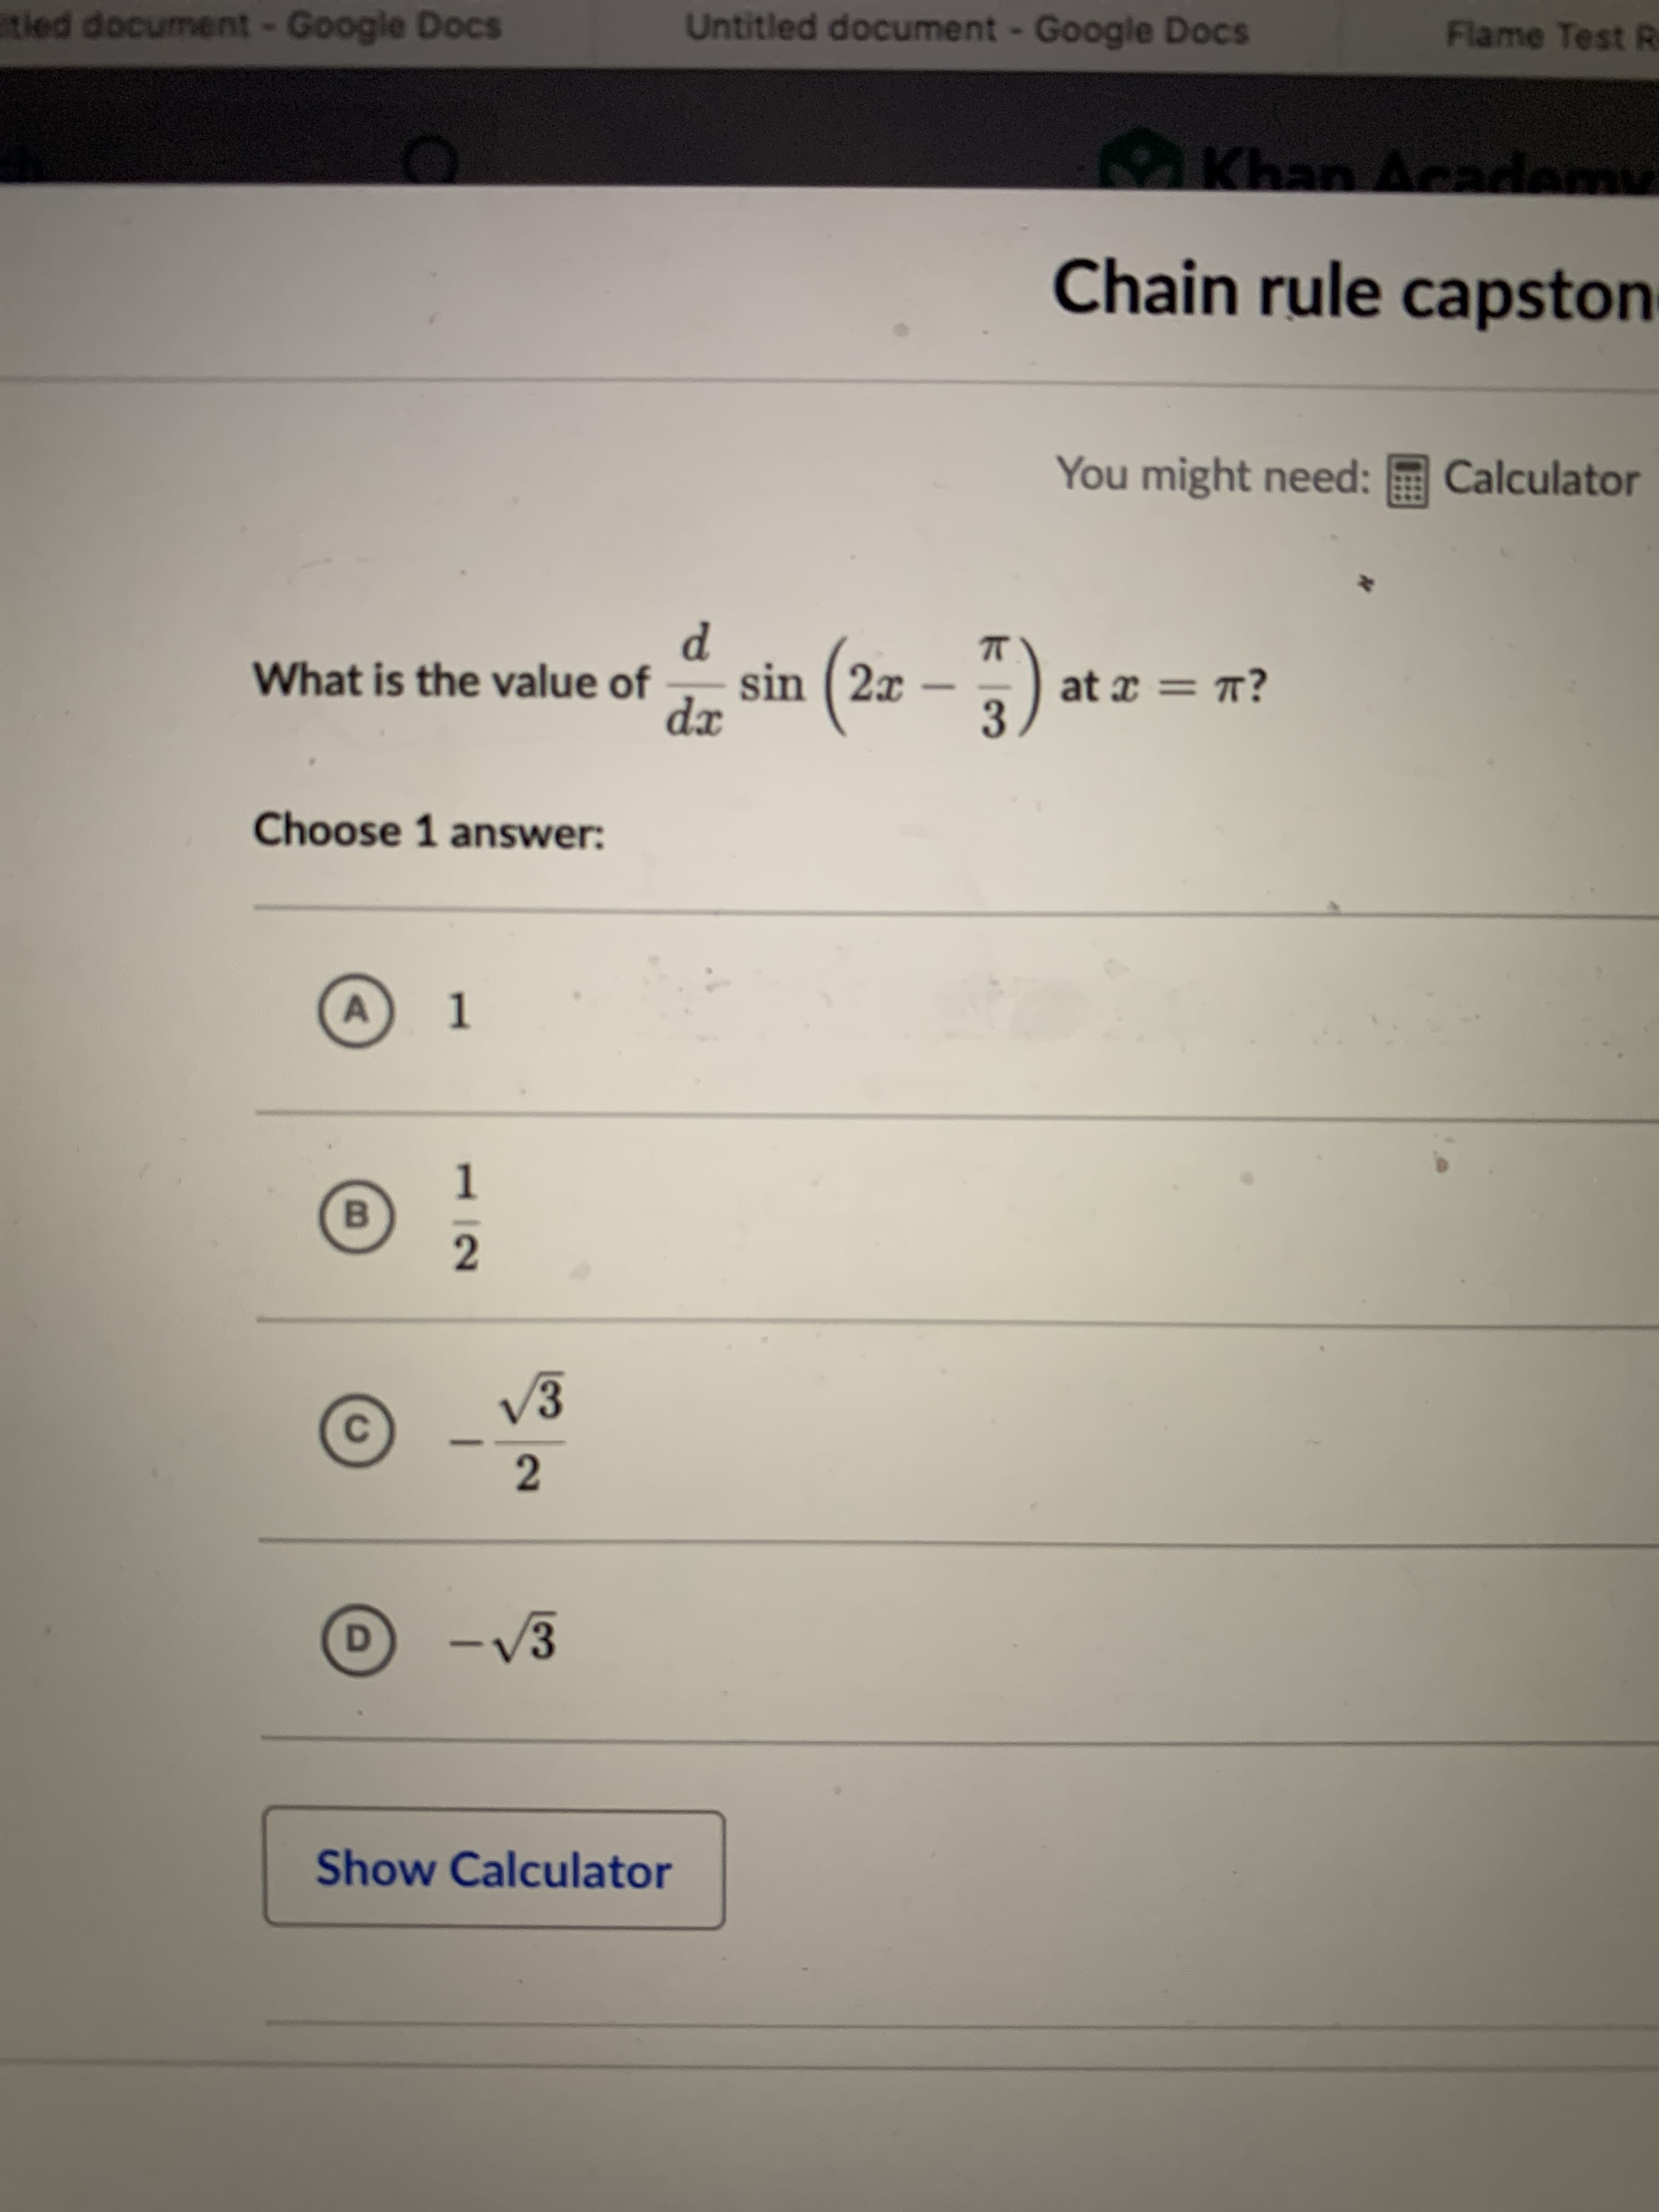 tied document- Google Docs
Untitled document - Google Docs
Flame Test R
Khan Acade
cad
dem
Chain rule capston
You might need: E Calculator
d.
What is the value of
dx
sin (2z - 5) at z = m?
at x = T?
Choose 1 answer:
B
V3
- V3
Show Calculator
2]
